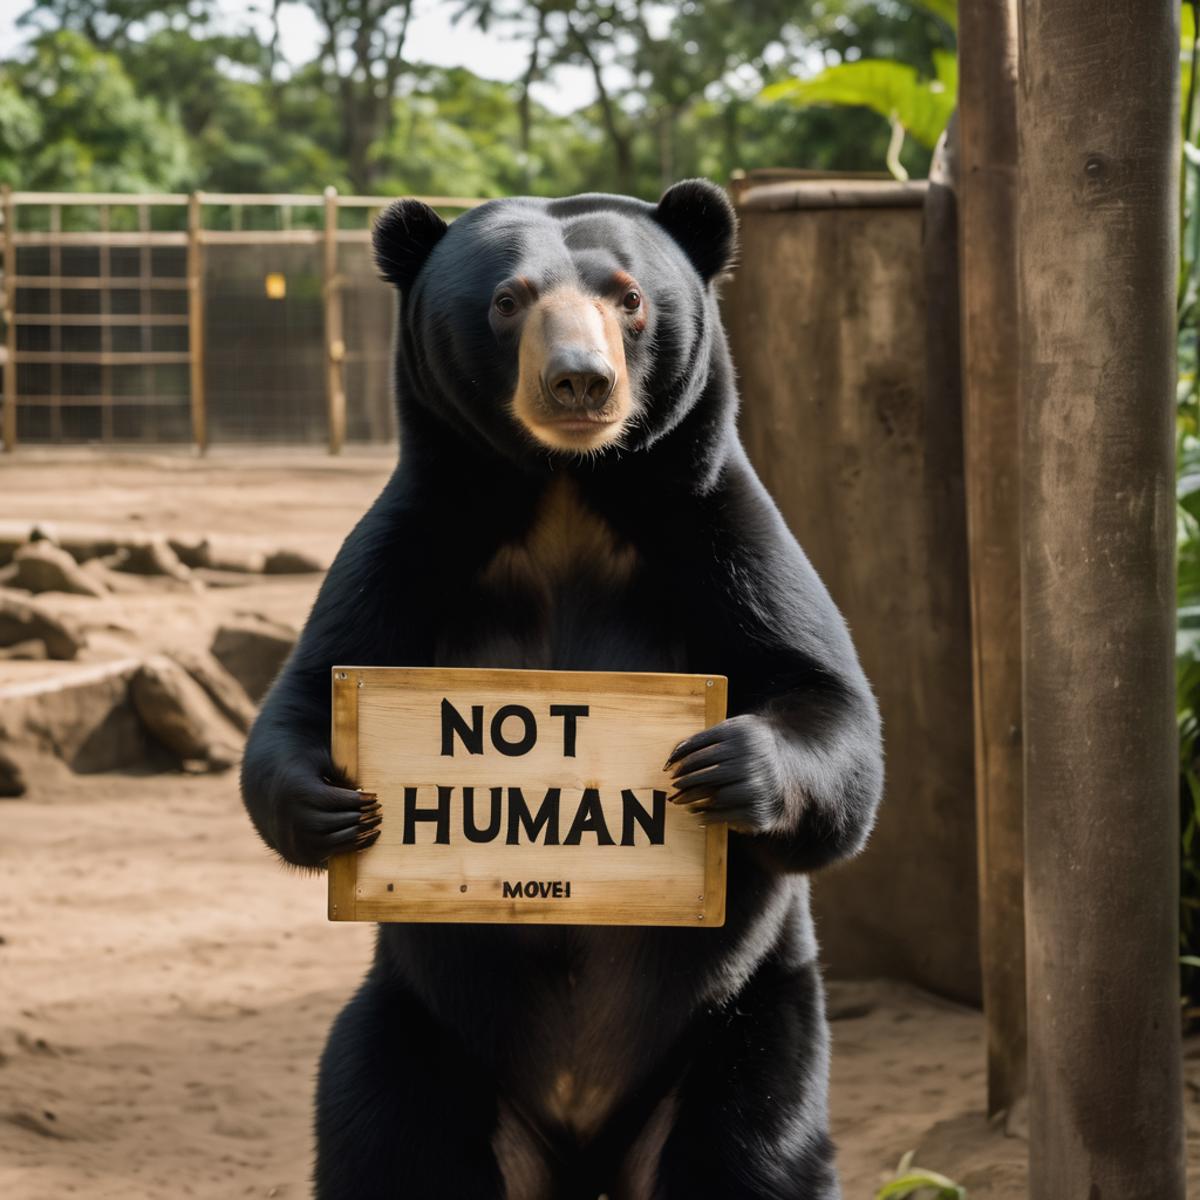 A black bear holding a sign that says "Not Human Moves."